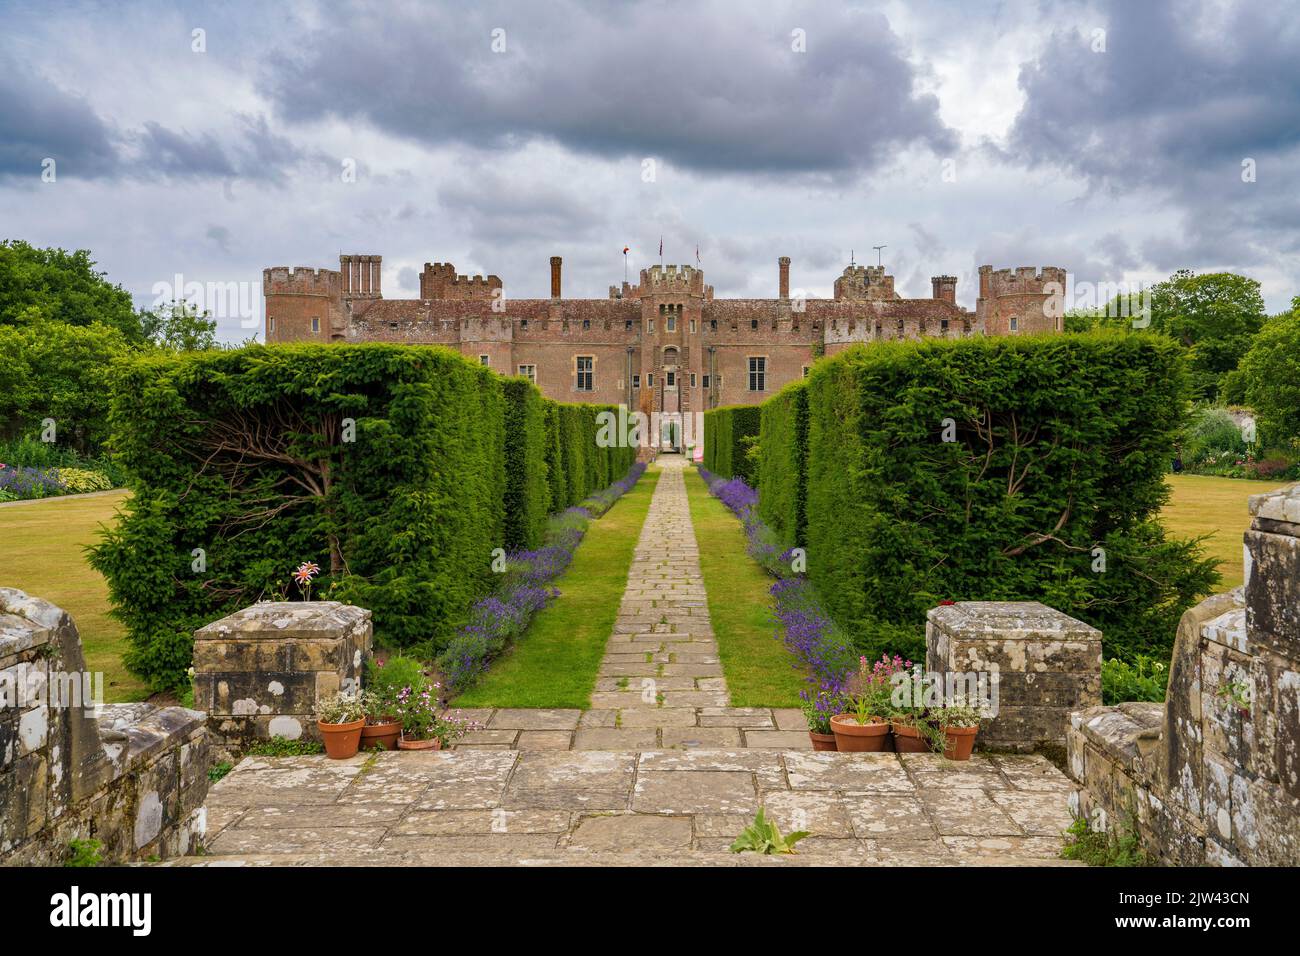 The gardens at Herstmonceux Castle, Herstmonceux, East Sussex, England, Uk Stock Photo